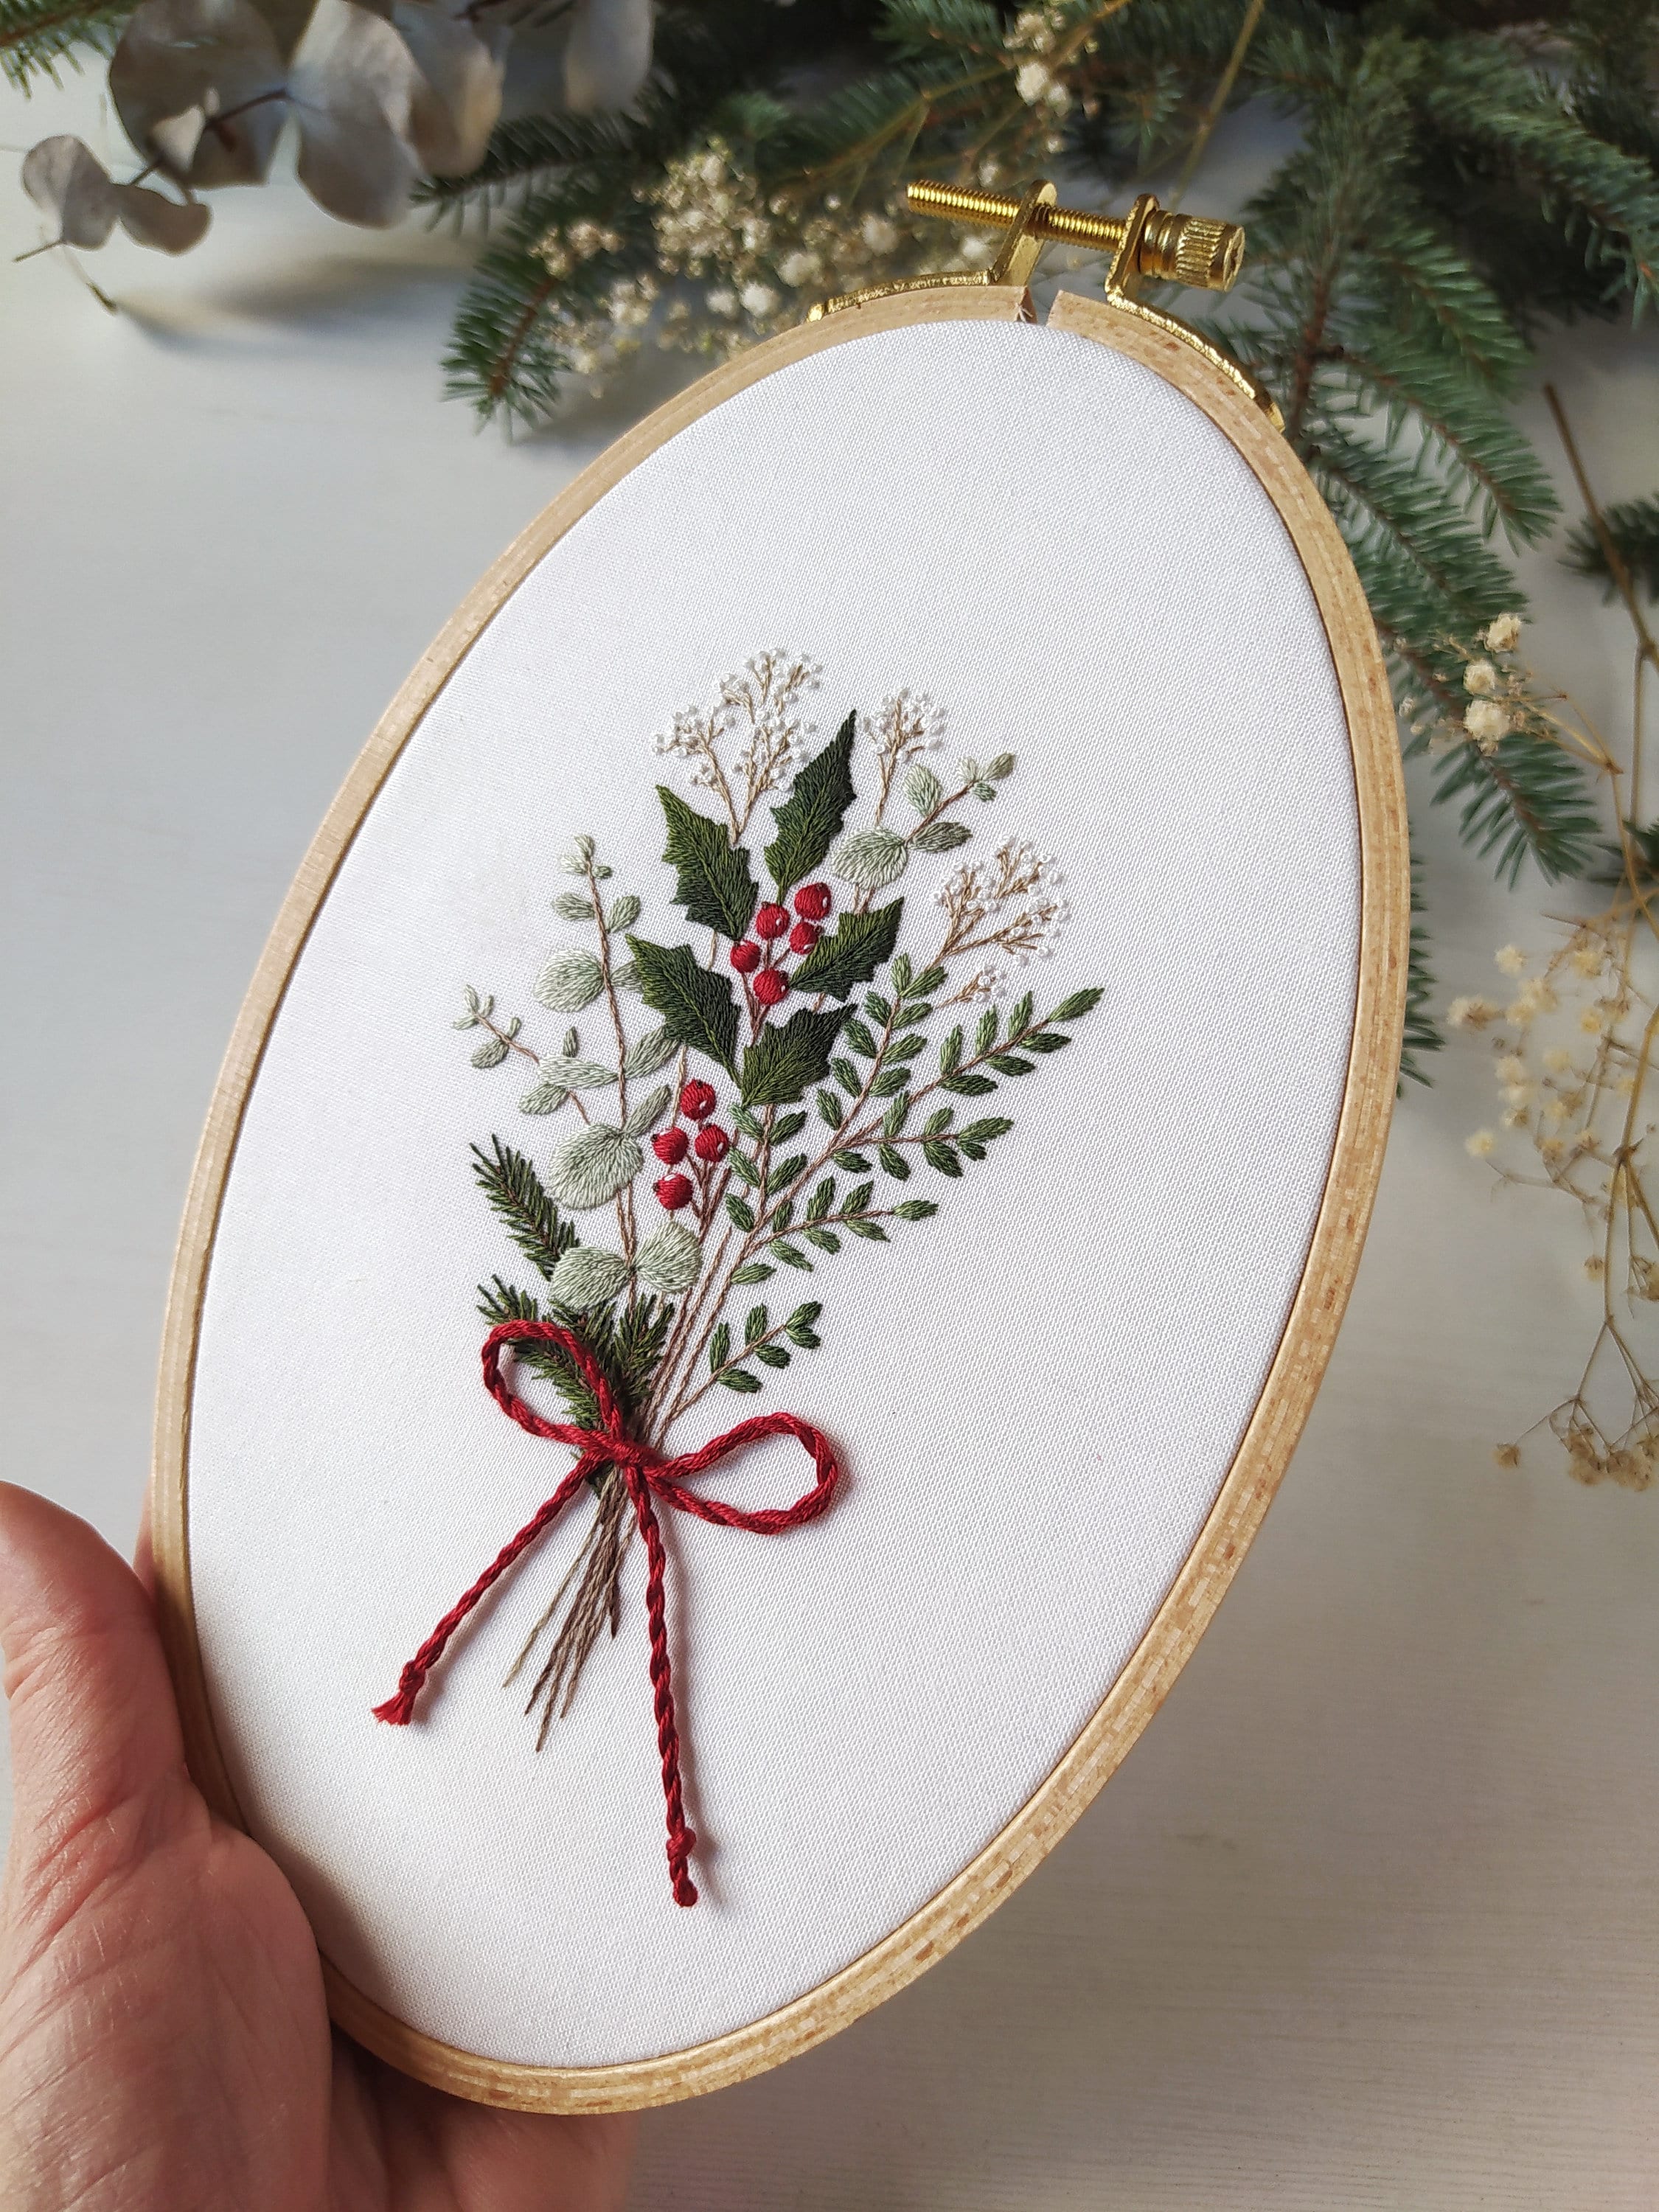 Winter Bouquet Embroidery Pattern Pdf Video Tutorial - Etsy